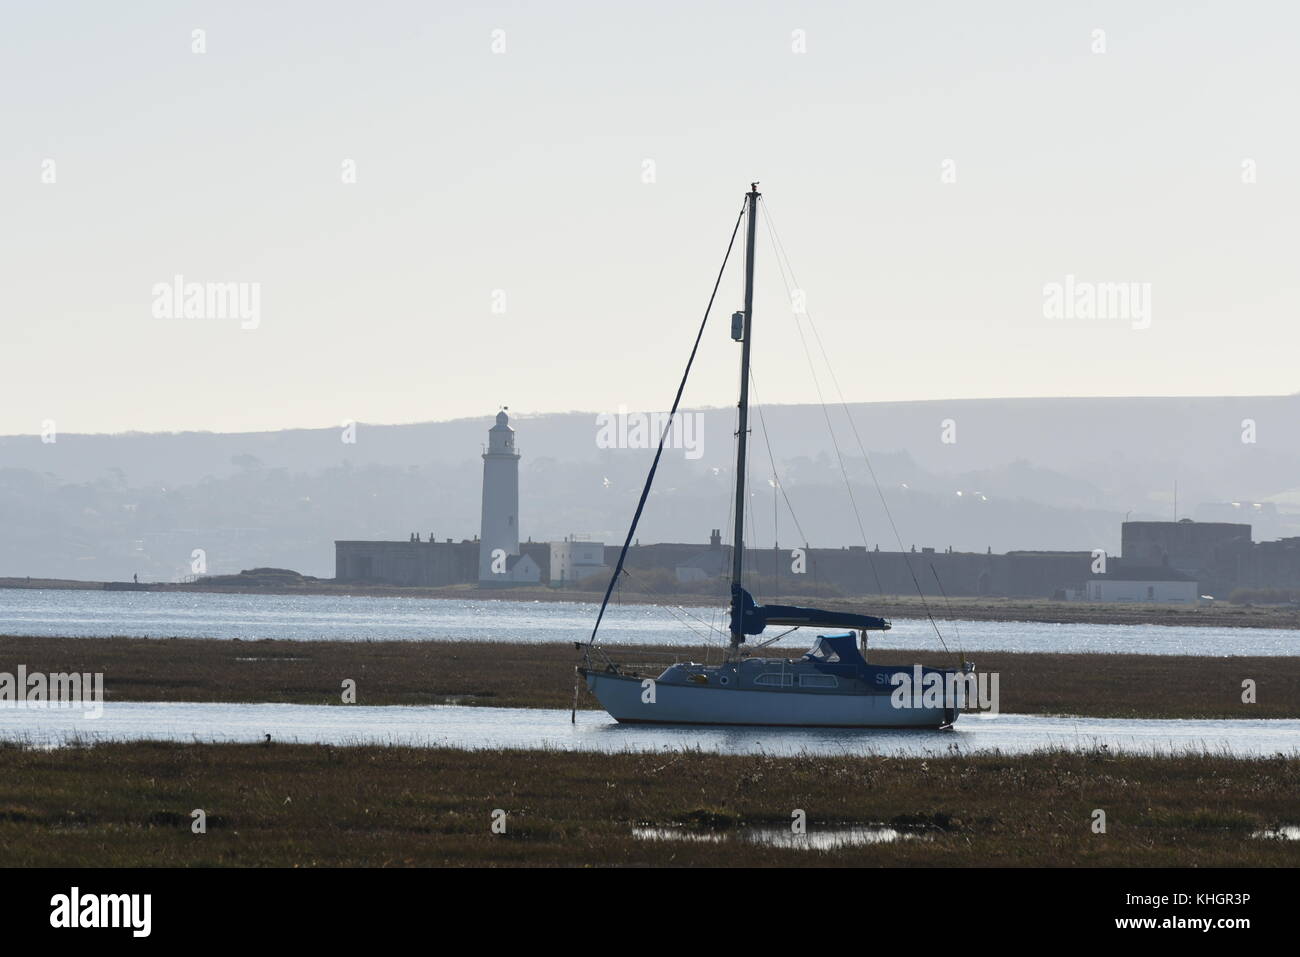 Hampshire, UK. 17th Nov, 2017. Birds, animals and people enjoy beautiful autumn weather in Lymington and Keyhaven Marshes Local Nature Reserve. Hampshire, UK. 17th November, 2017. Credit: Ajit Wick/Alamy Live News Stock Photo